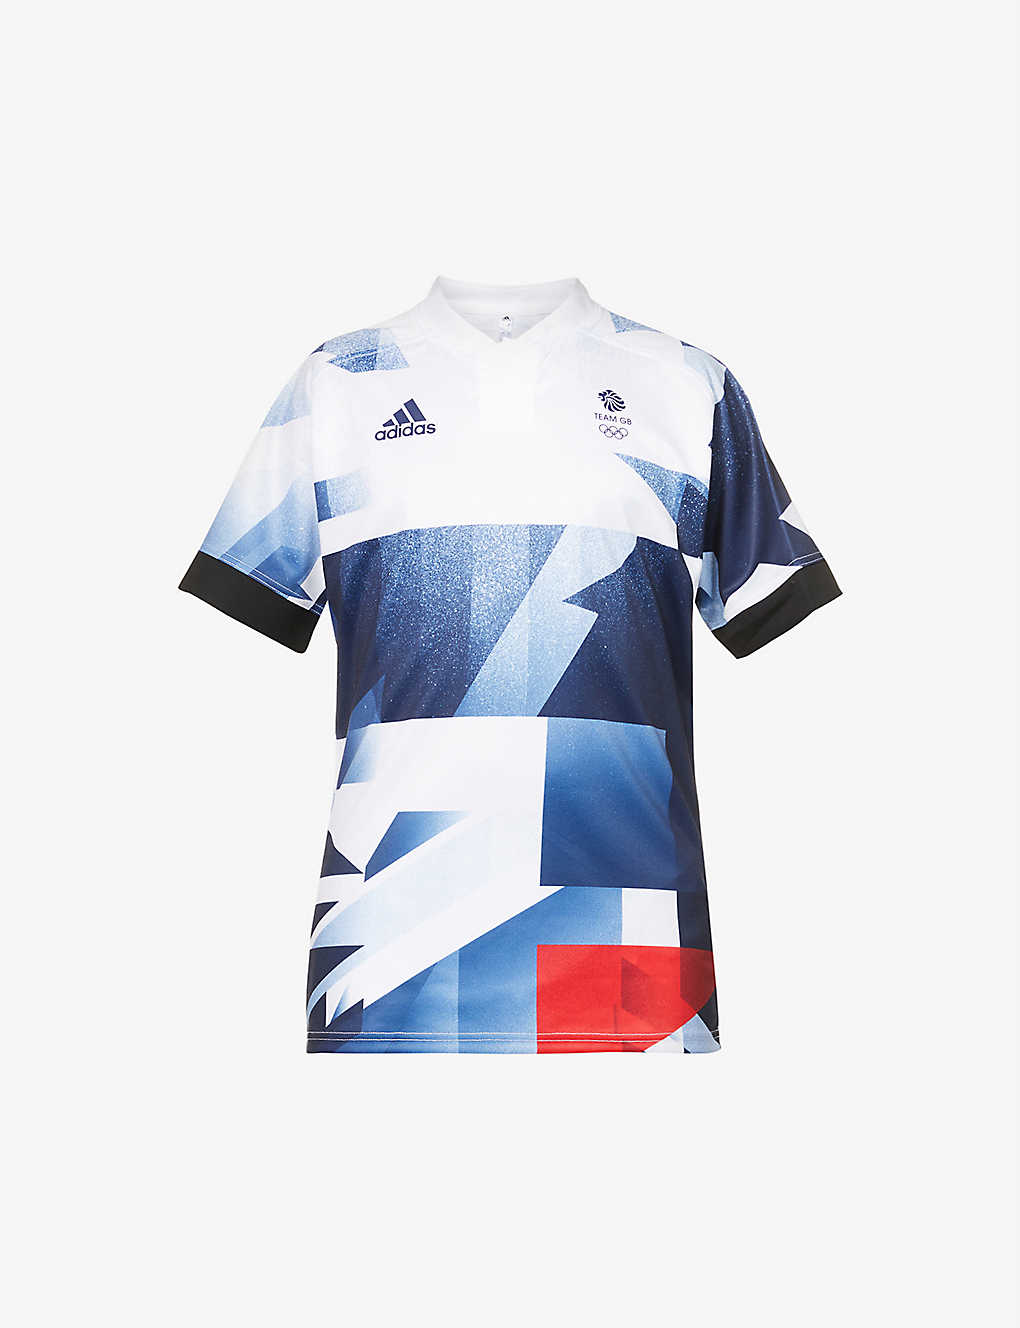 Team GB rugby jersey(9325670)